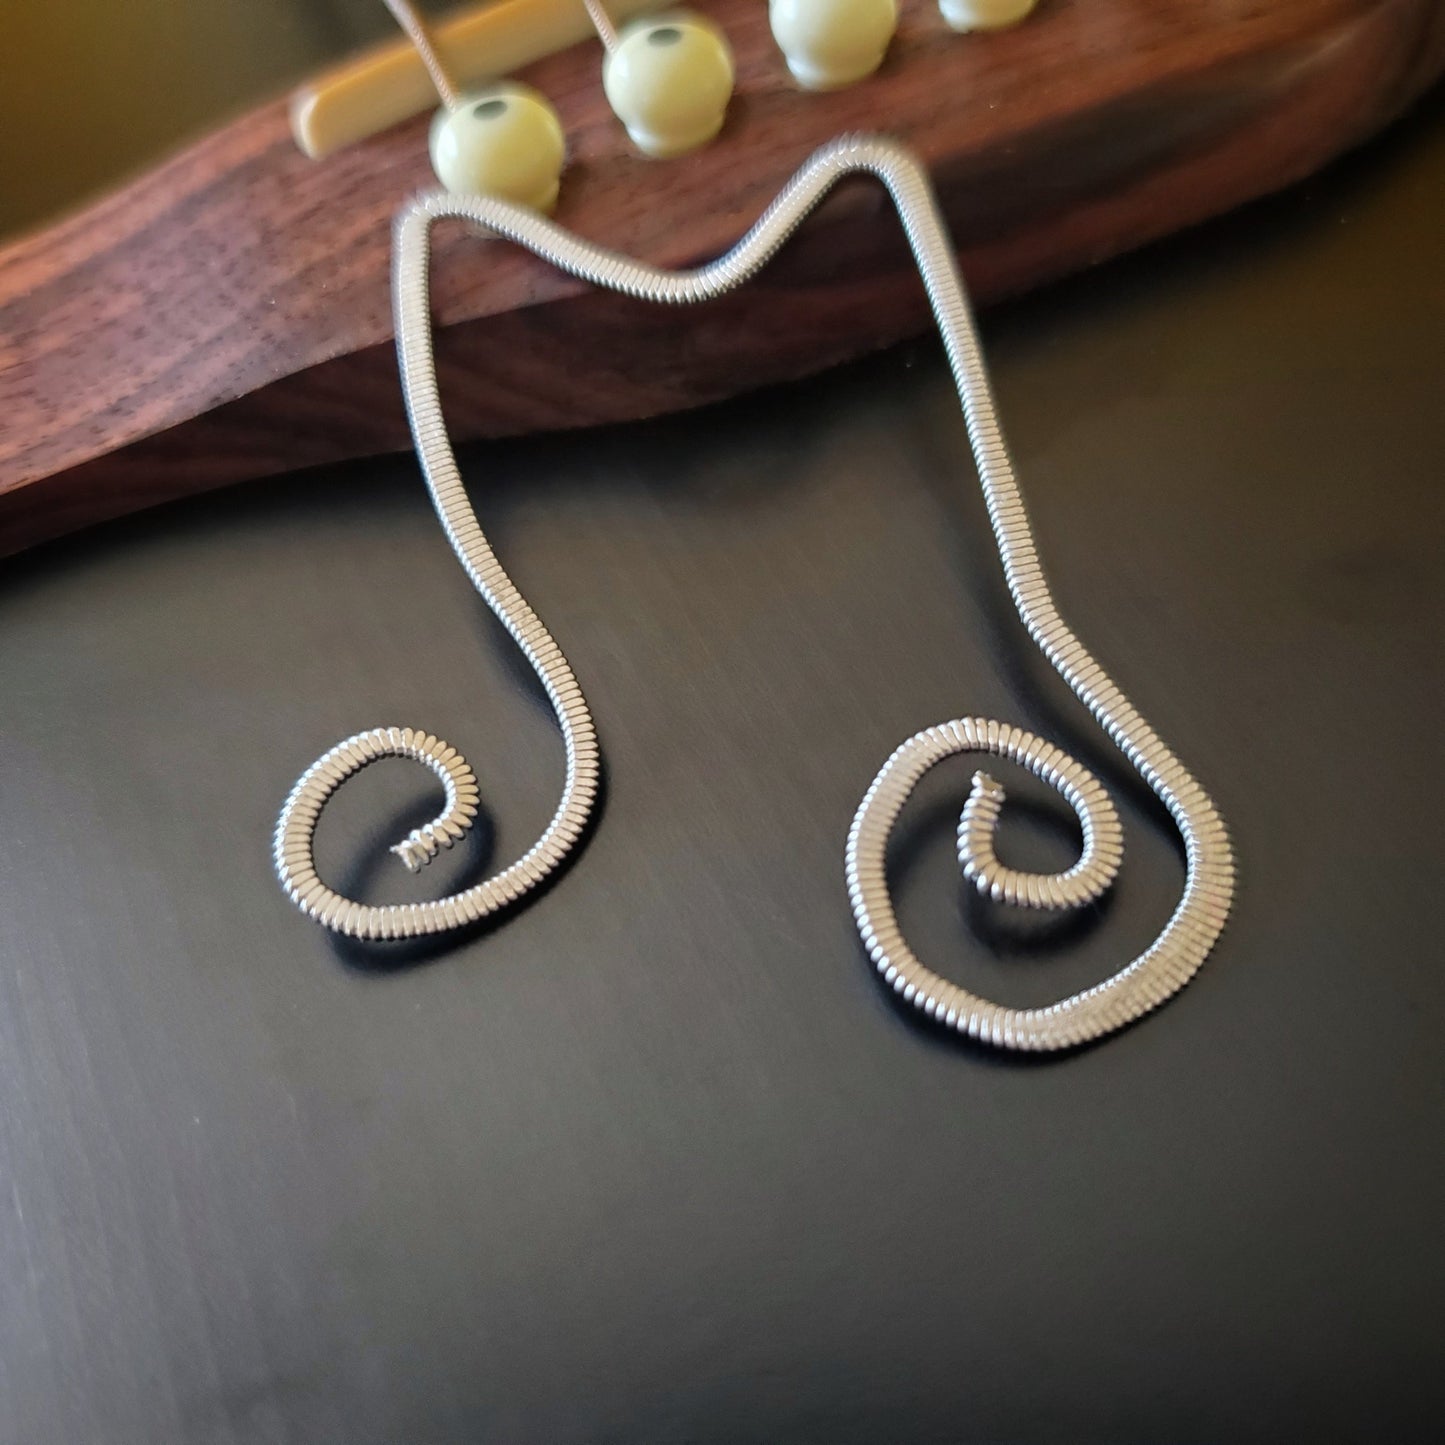 bookmark shaped like a double quarter note made from a hammered guitar string - bookmark is lying on the bridge of a black guitar